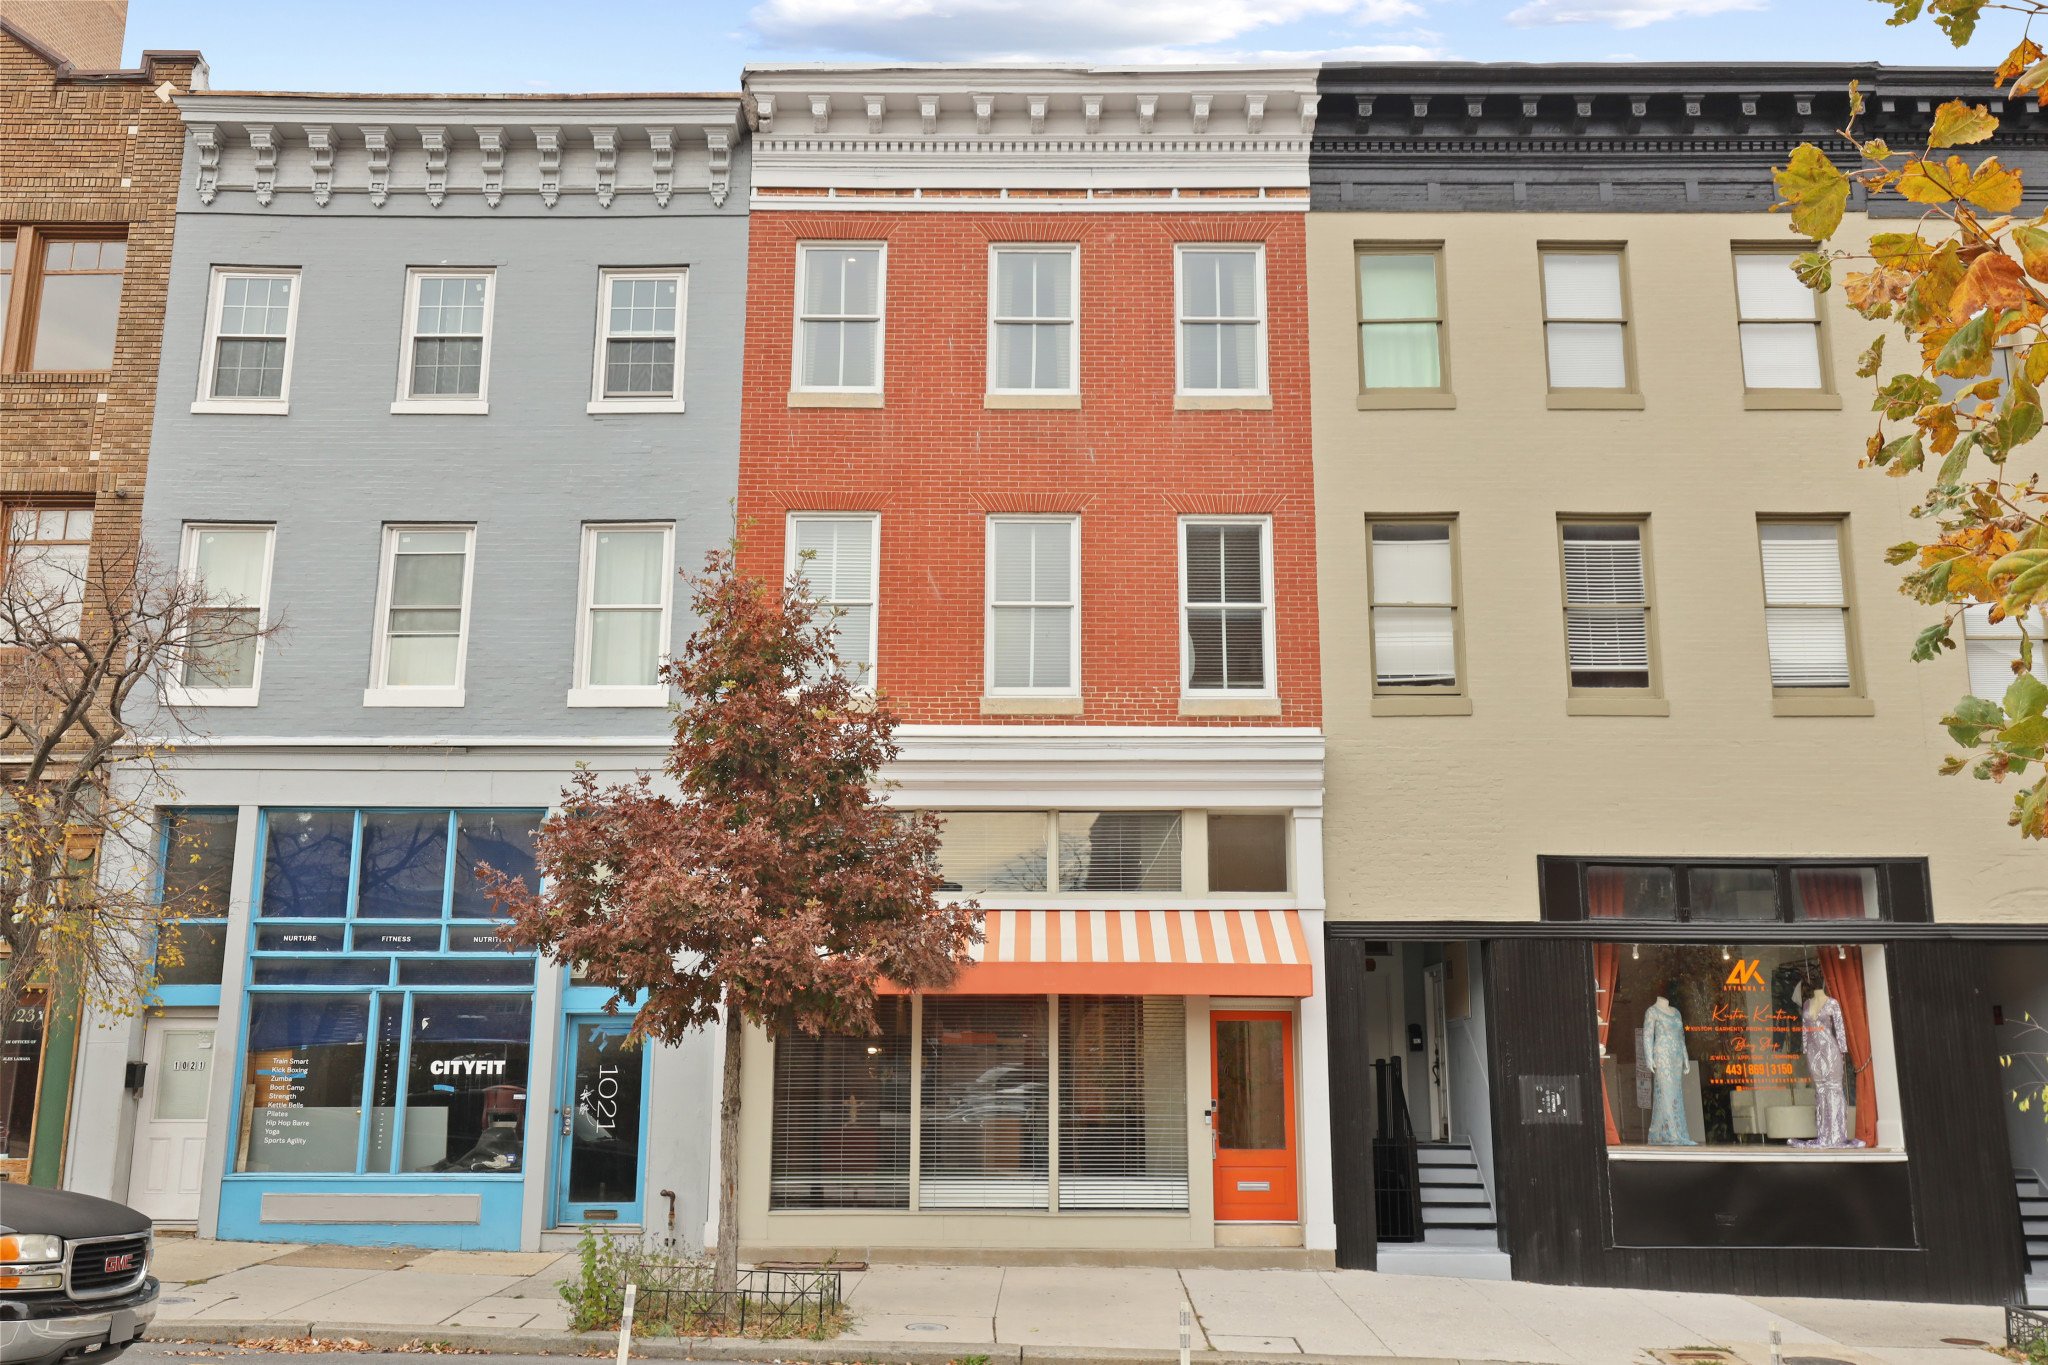 FOR SALE / 1019 Cathedral Street / Baltimore, MD 21201